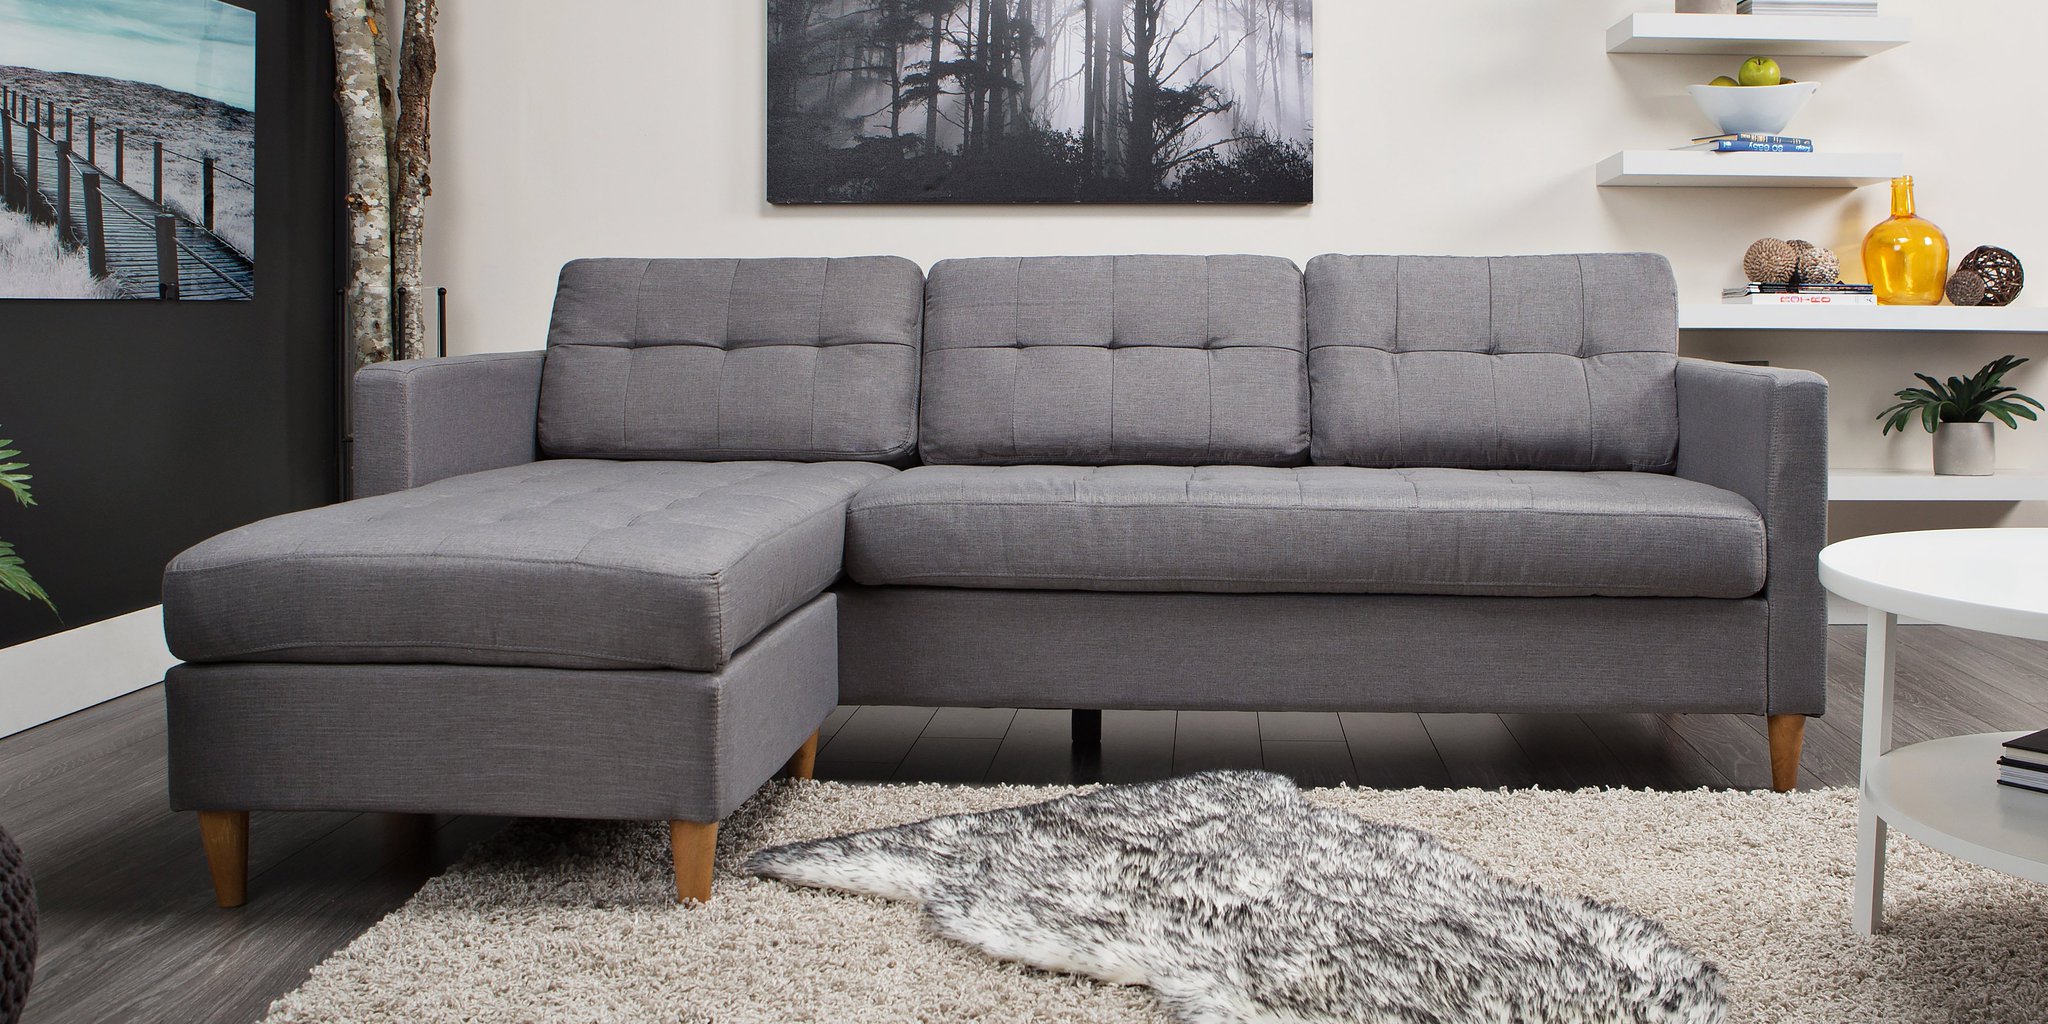 jysk mariager sofa bed review